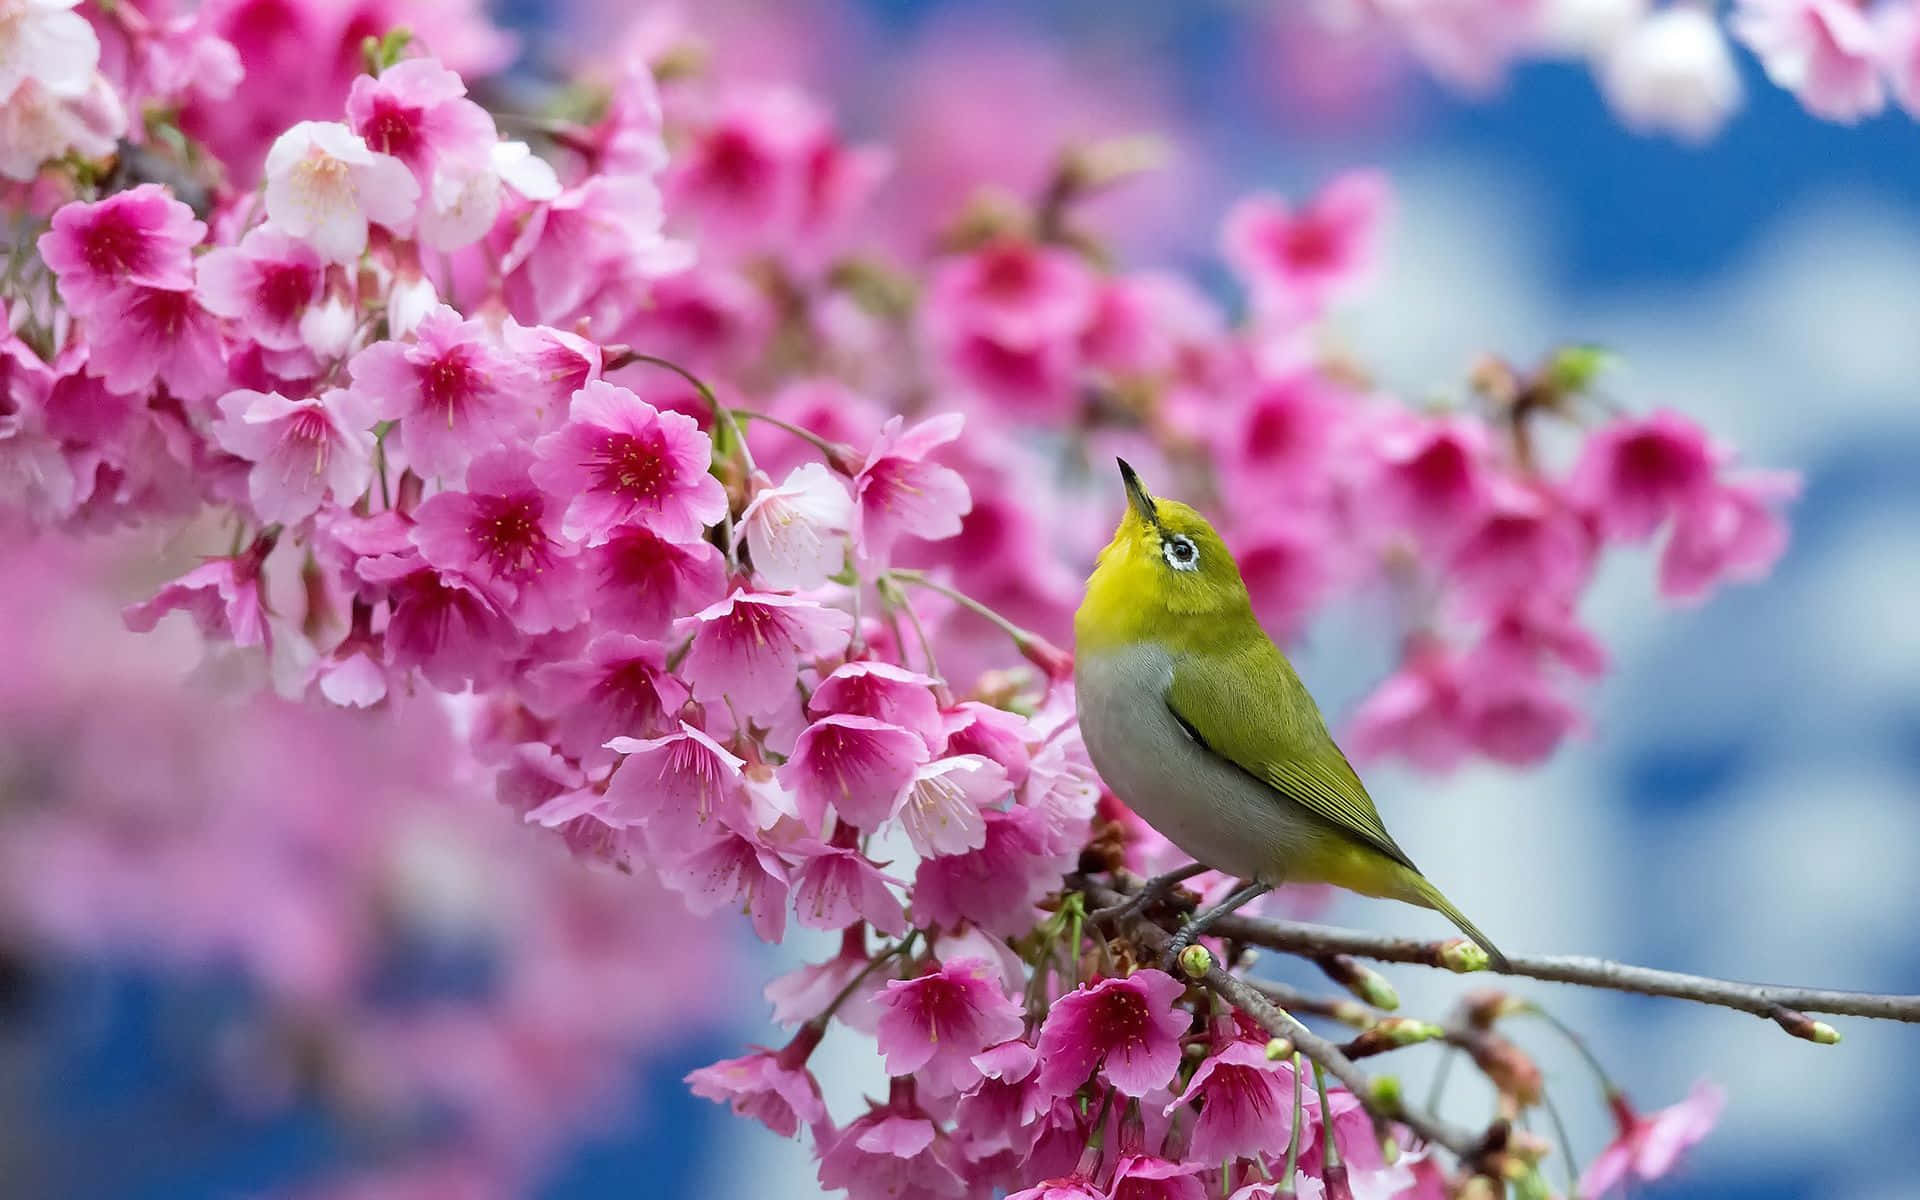 Discover the beauty of springtime in nature